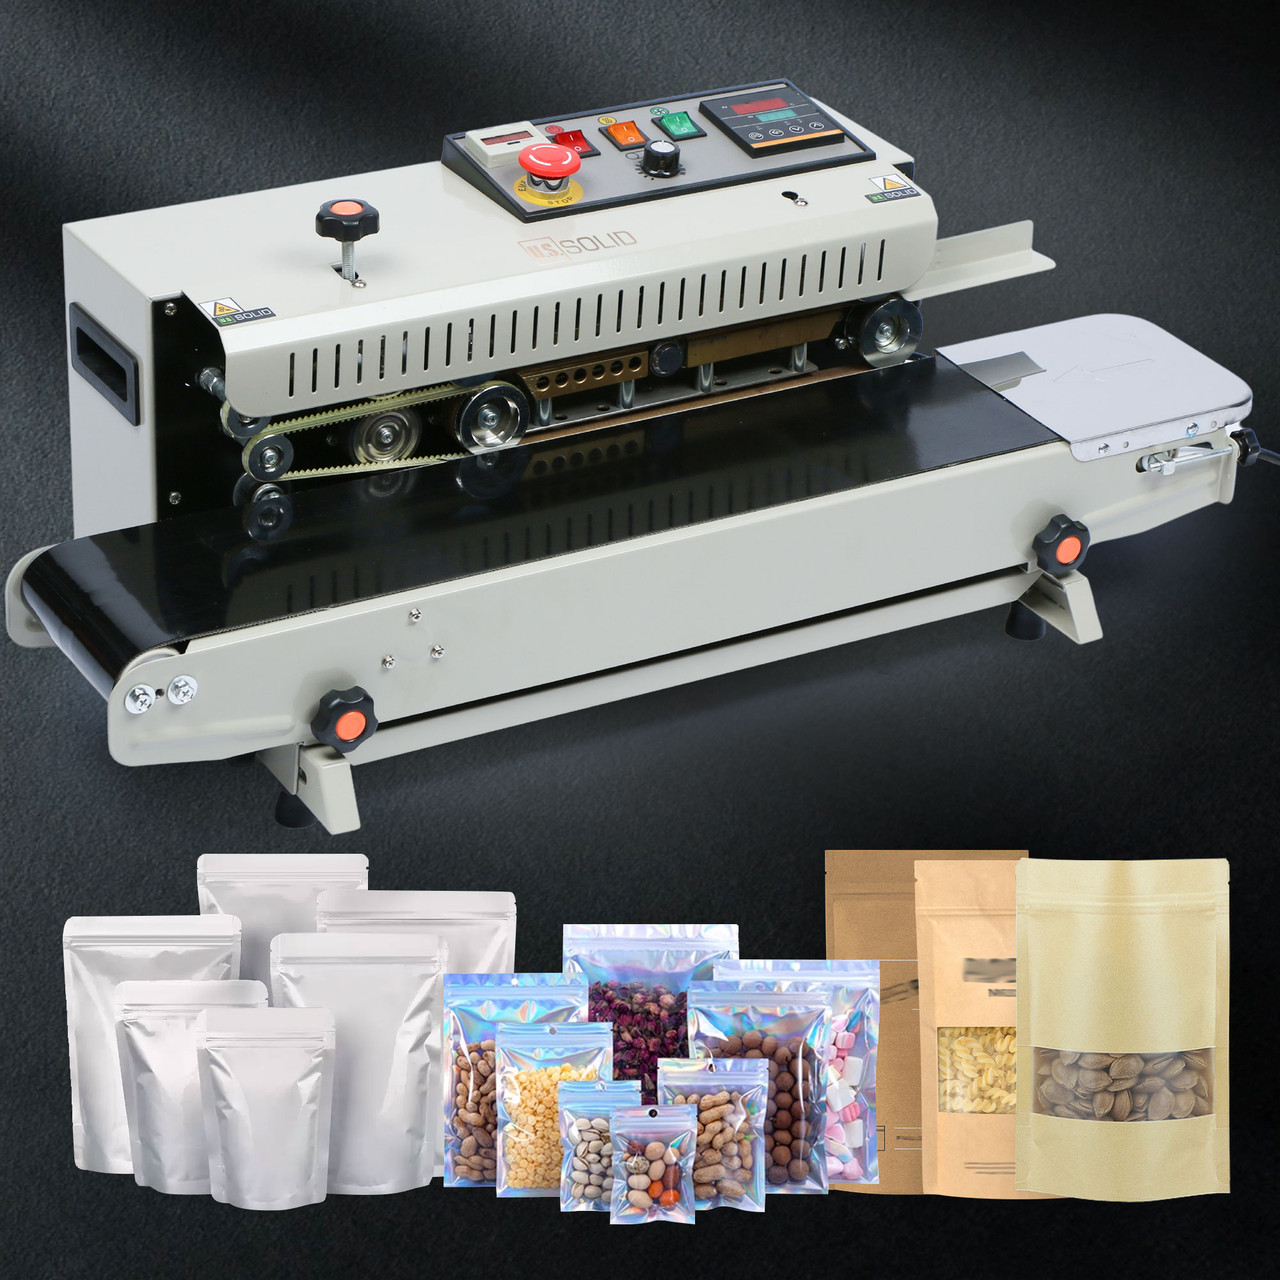 U.S. SOLID Continuous Bag Band Sealing Machine - Automatic Horizontal Band  Sealer with Digital Temperature Control for 0.02-0.08mm PVC Bags - U.S.  Solid